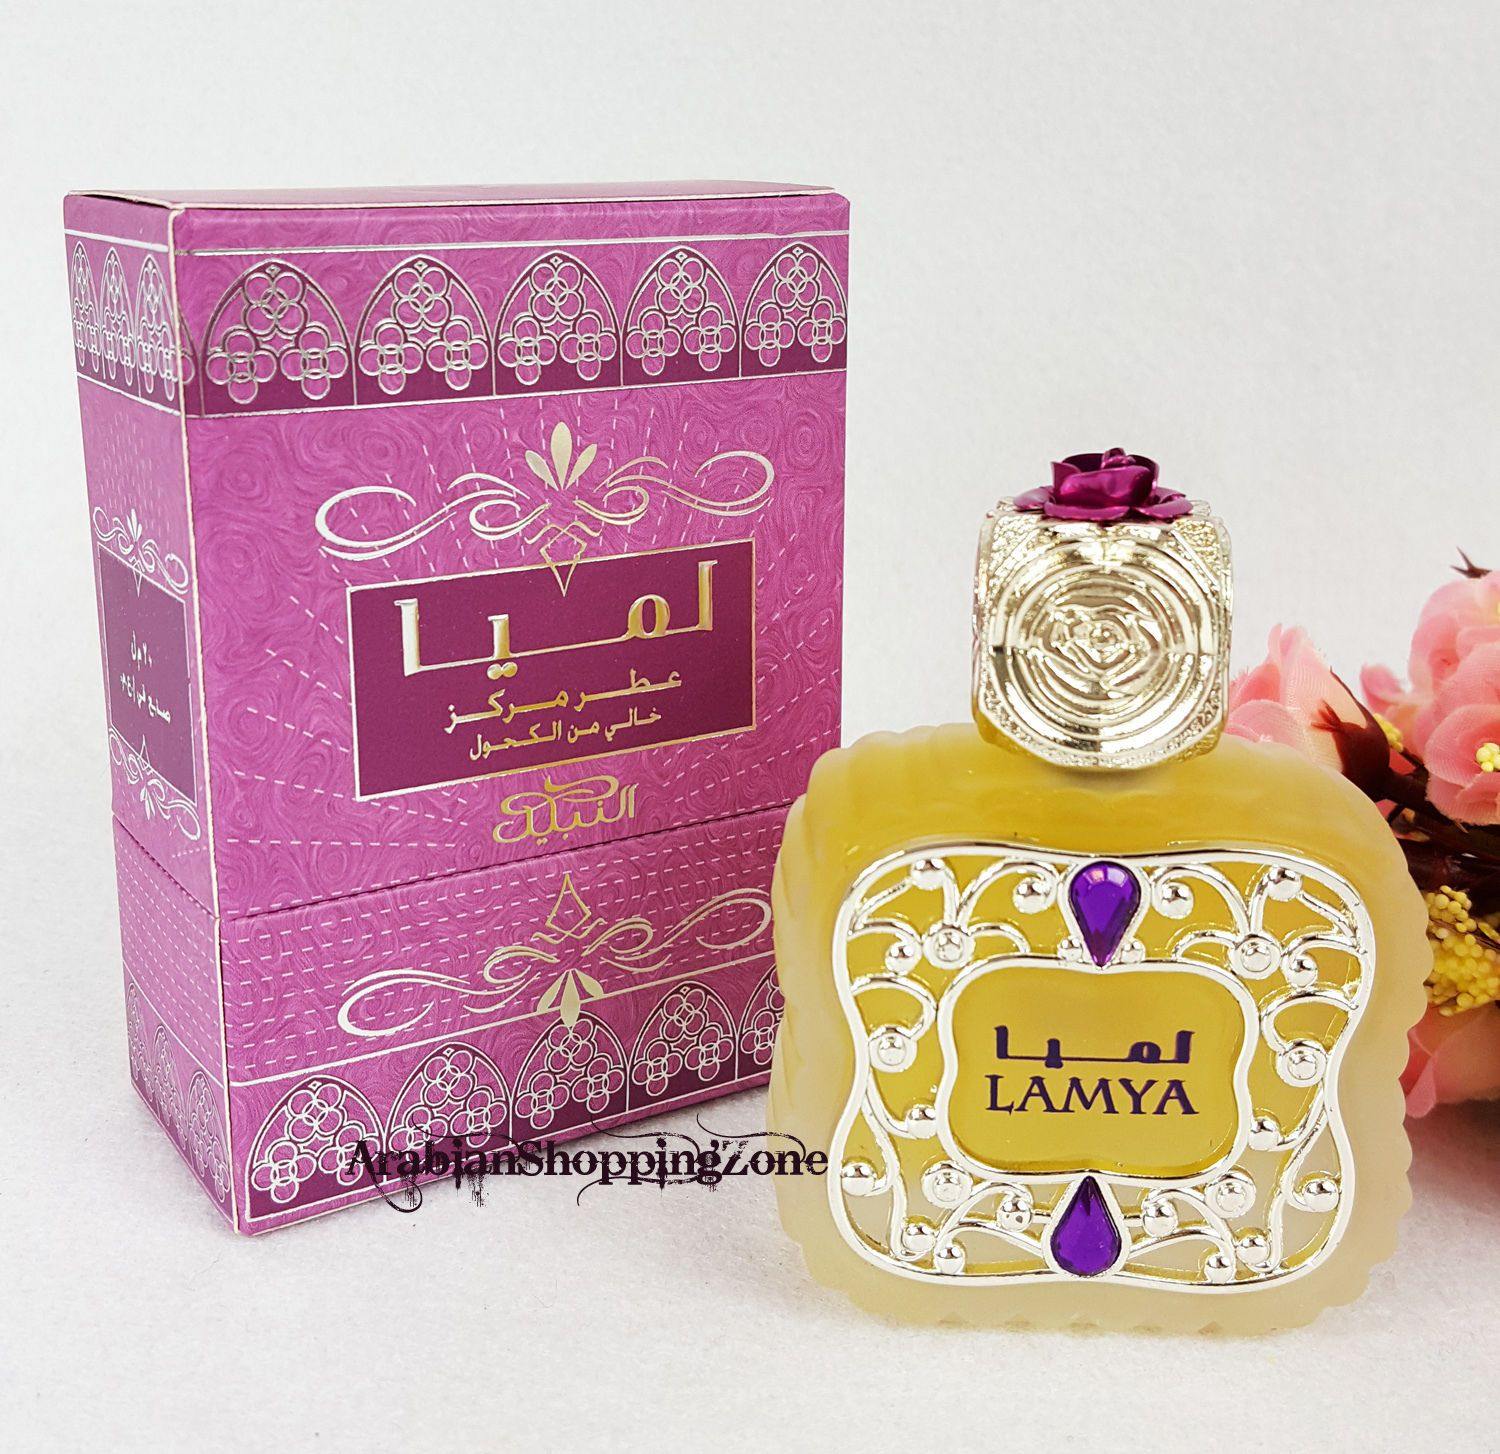 Lamya by Nabeel 20ml Concentrated Oil Perfume Free from Alcohol - Arabian Shopping Zone